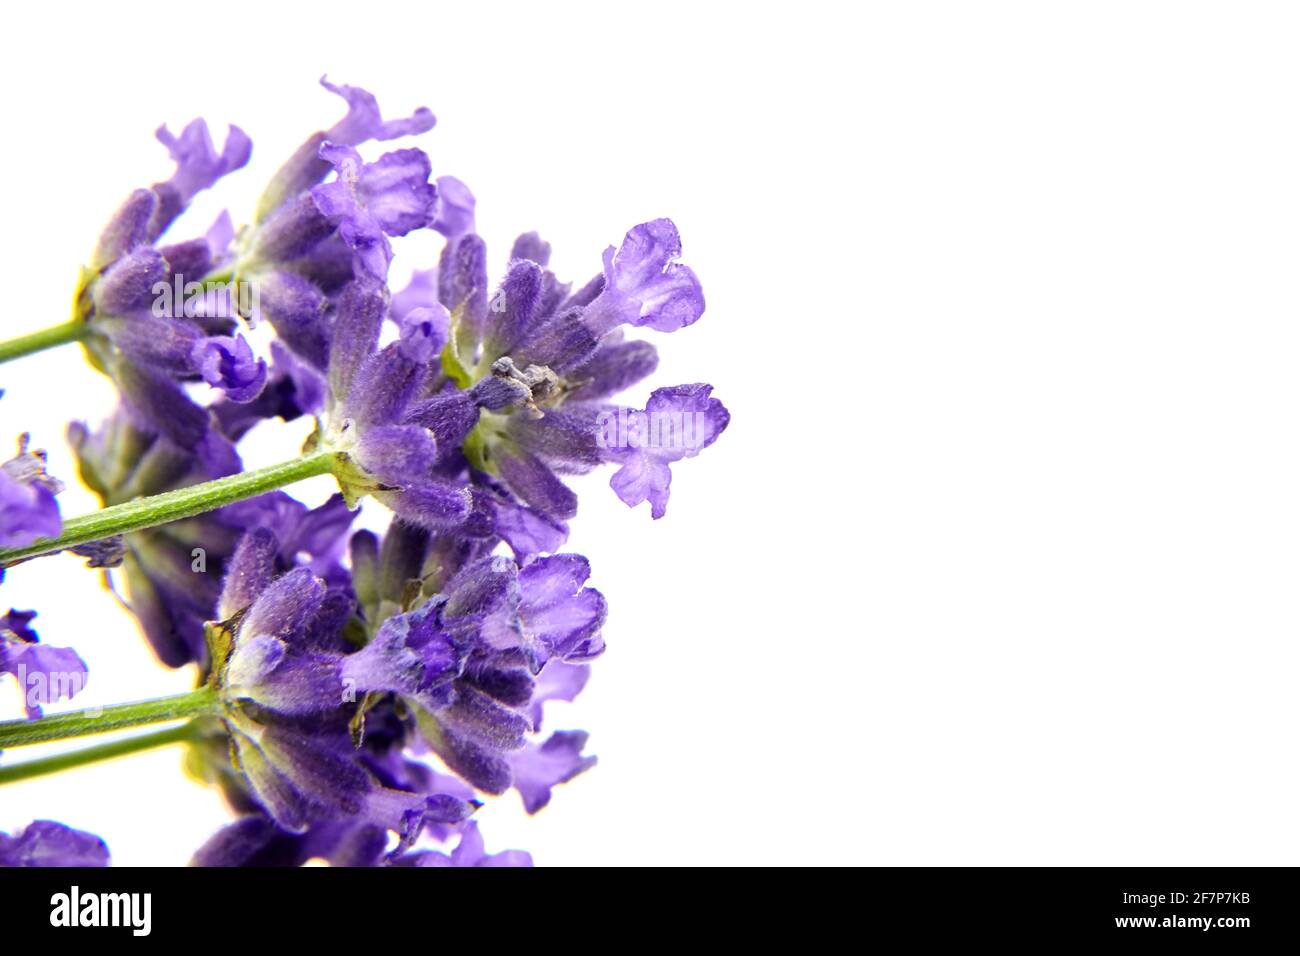 Lavender flowers isolated on white background. Fresh lavender herb plant closeup Stock Photo